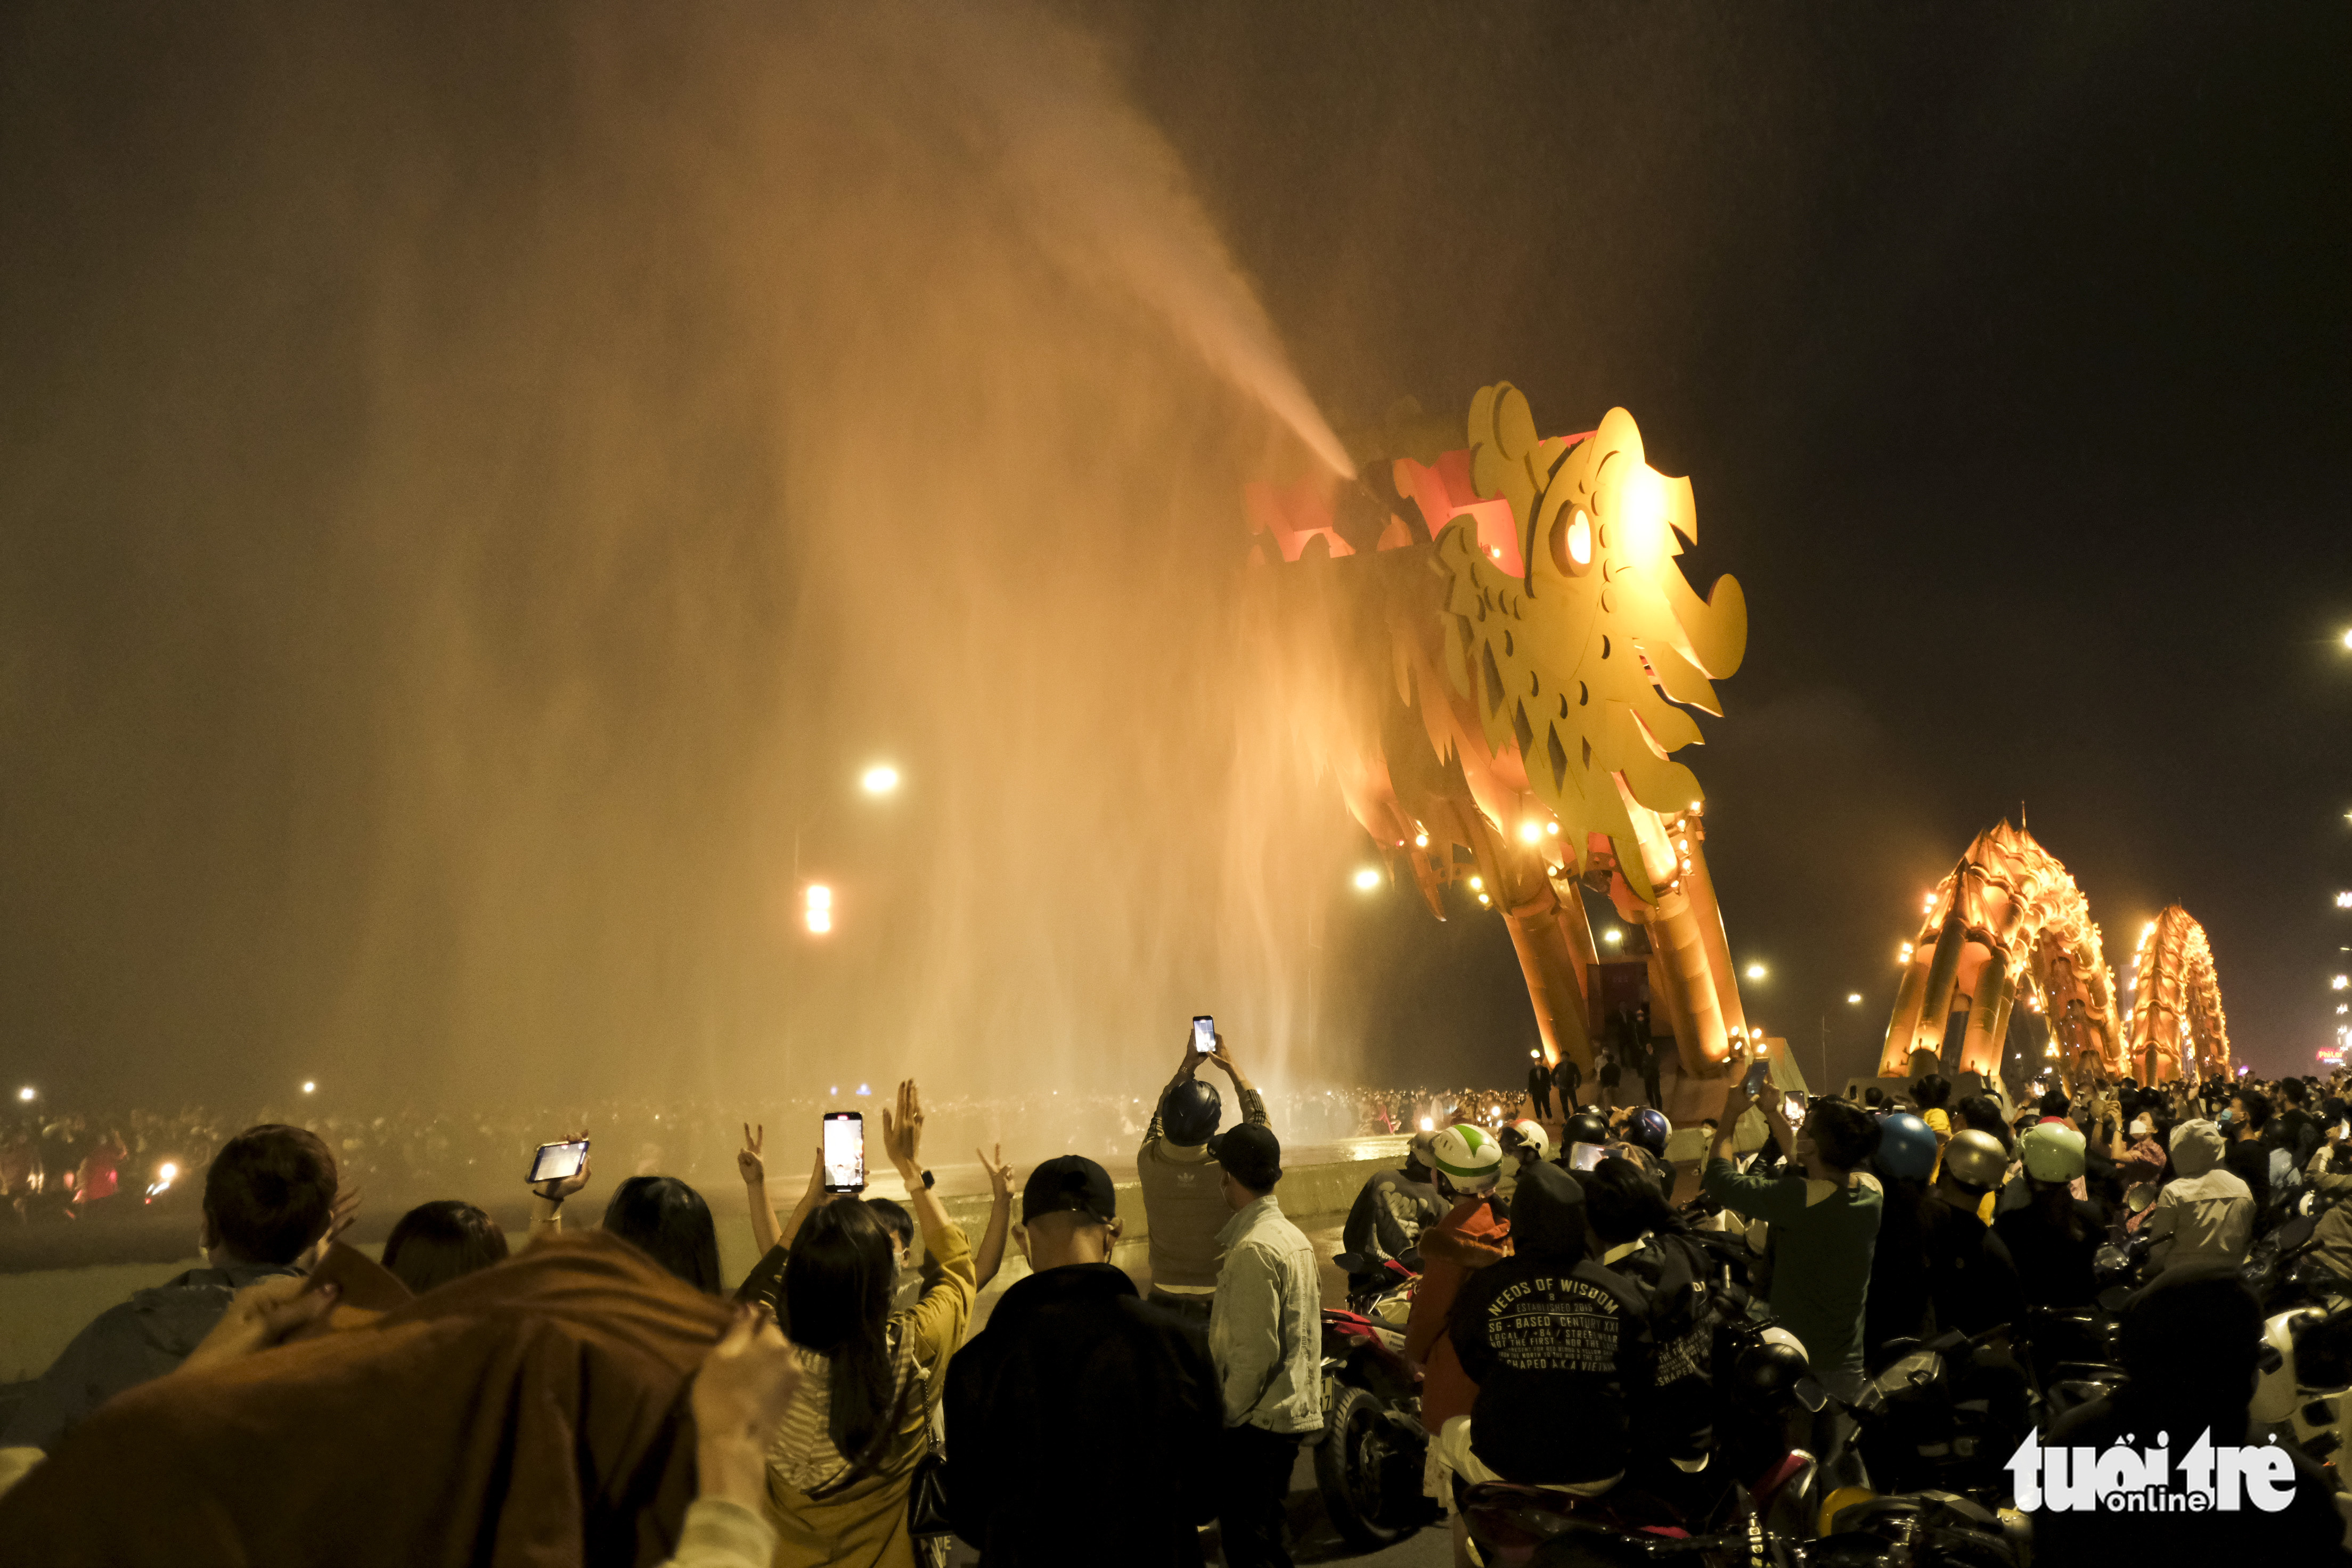 People watch the fire and water breathing show at Dragon Bridge in Da Nang City, Vietnam, February 12, 2022. Photo: Tan Luc / Tuoi Tre